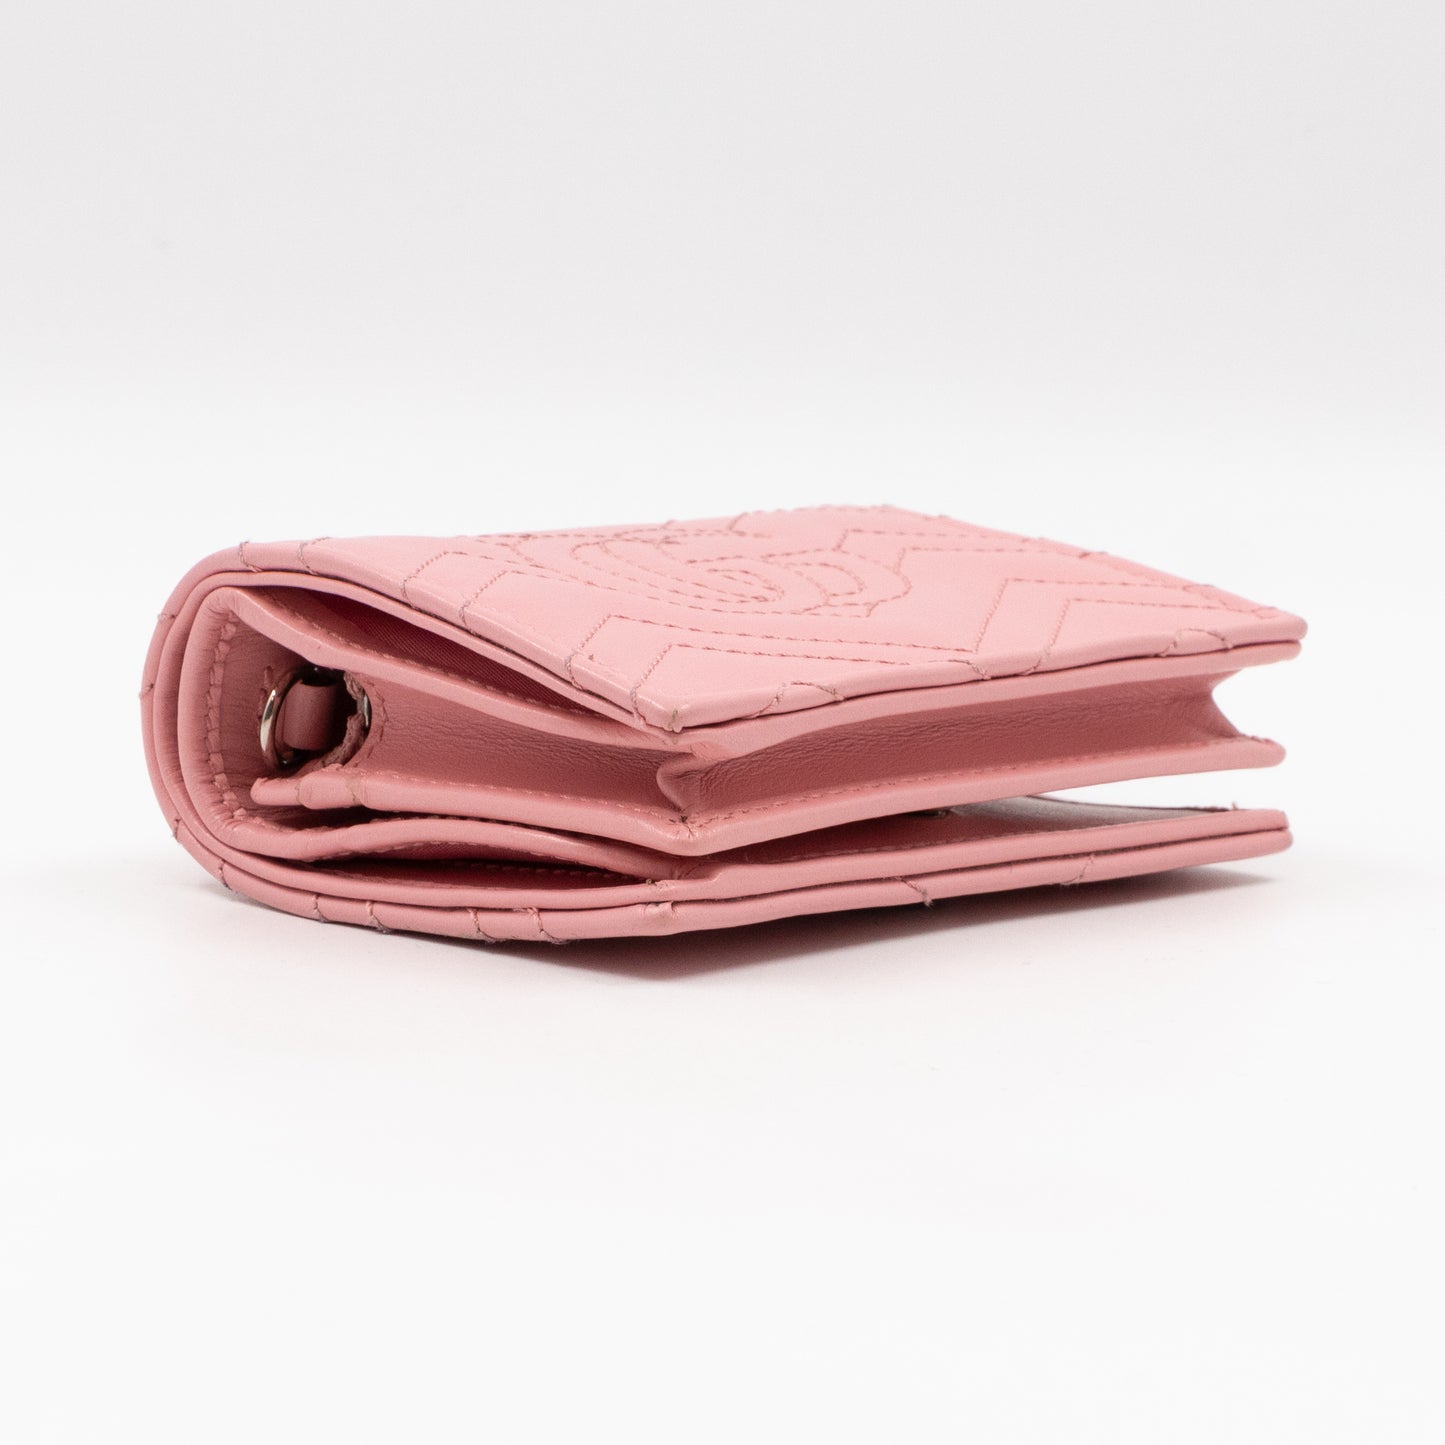 GG Marmont Mini Wallet On Chain Matelasse Pink Leather